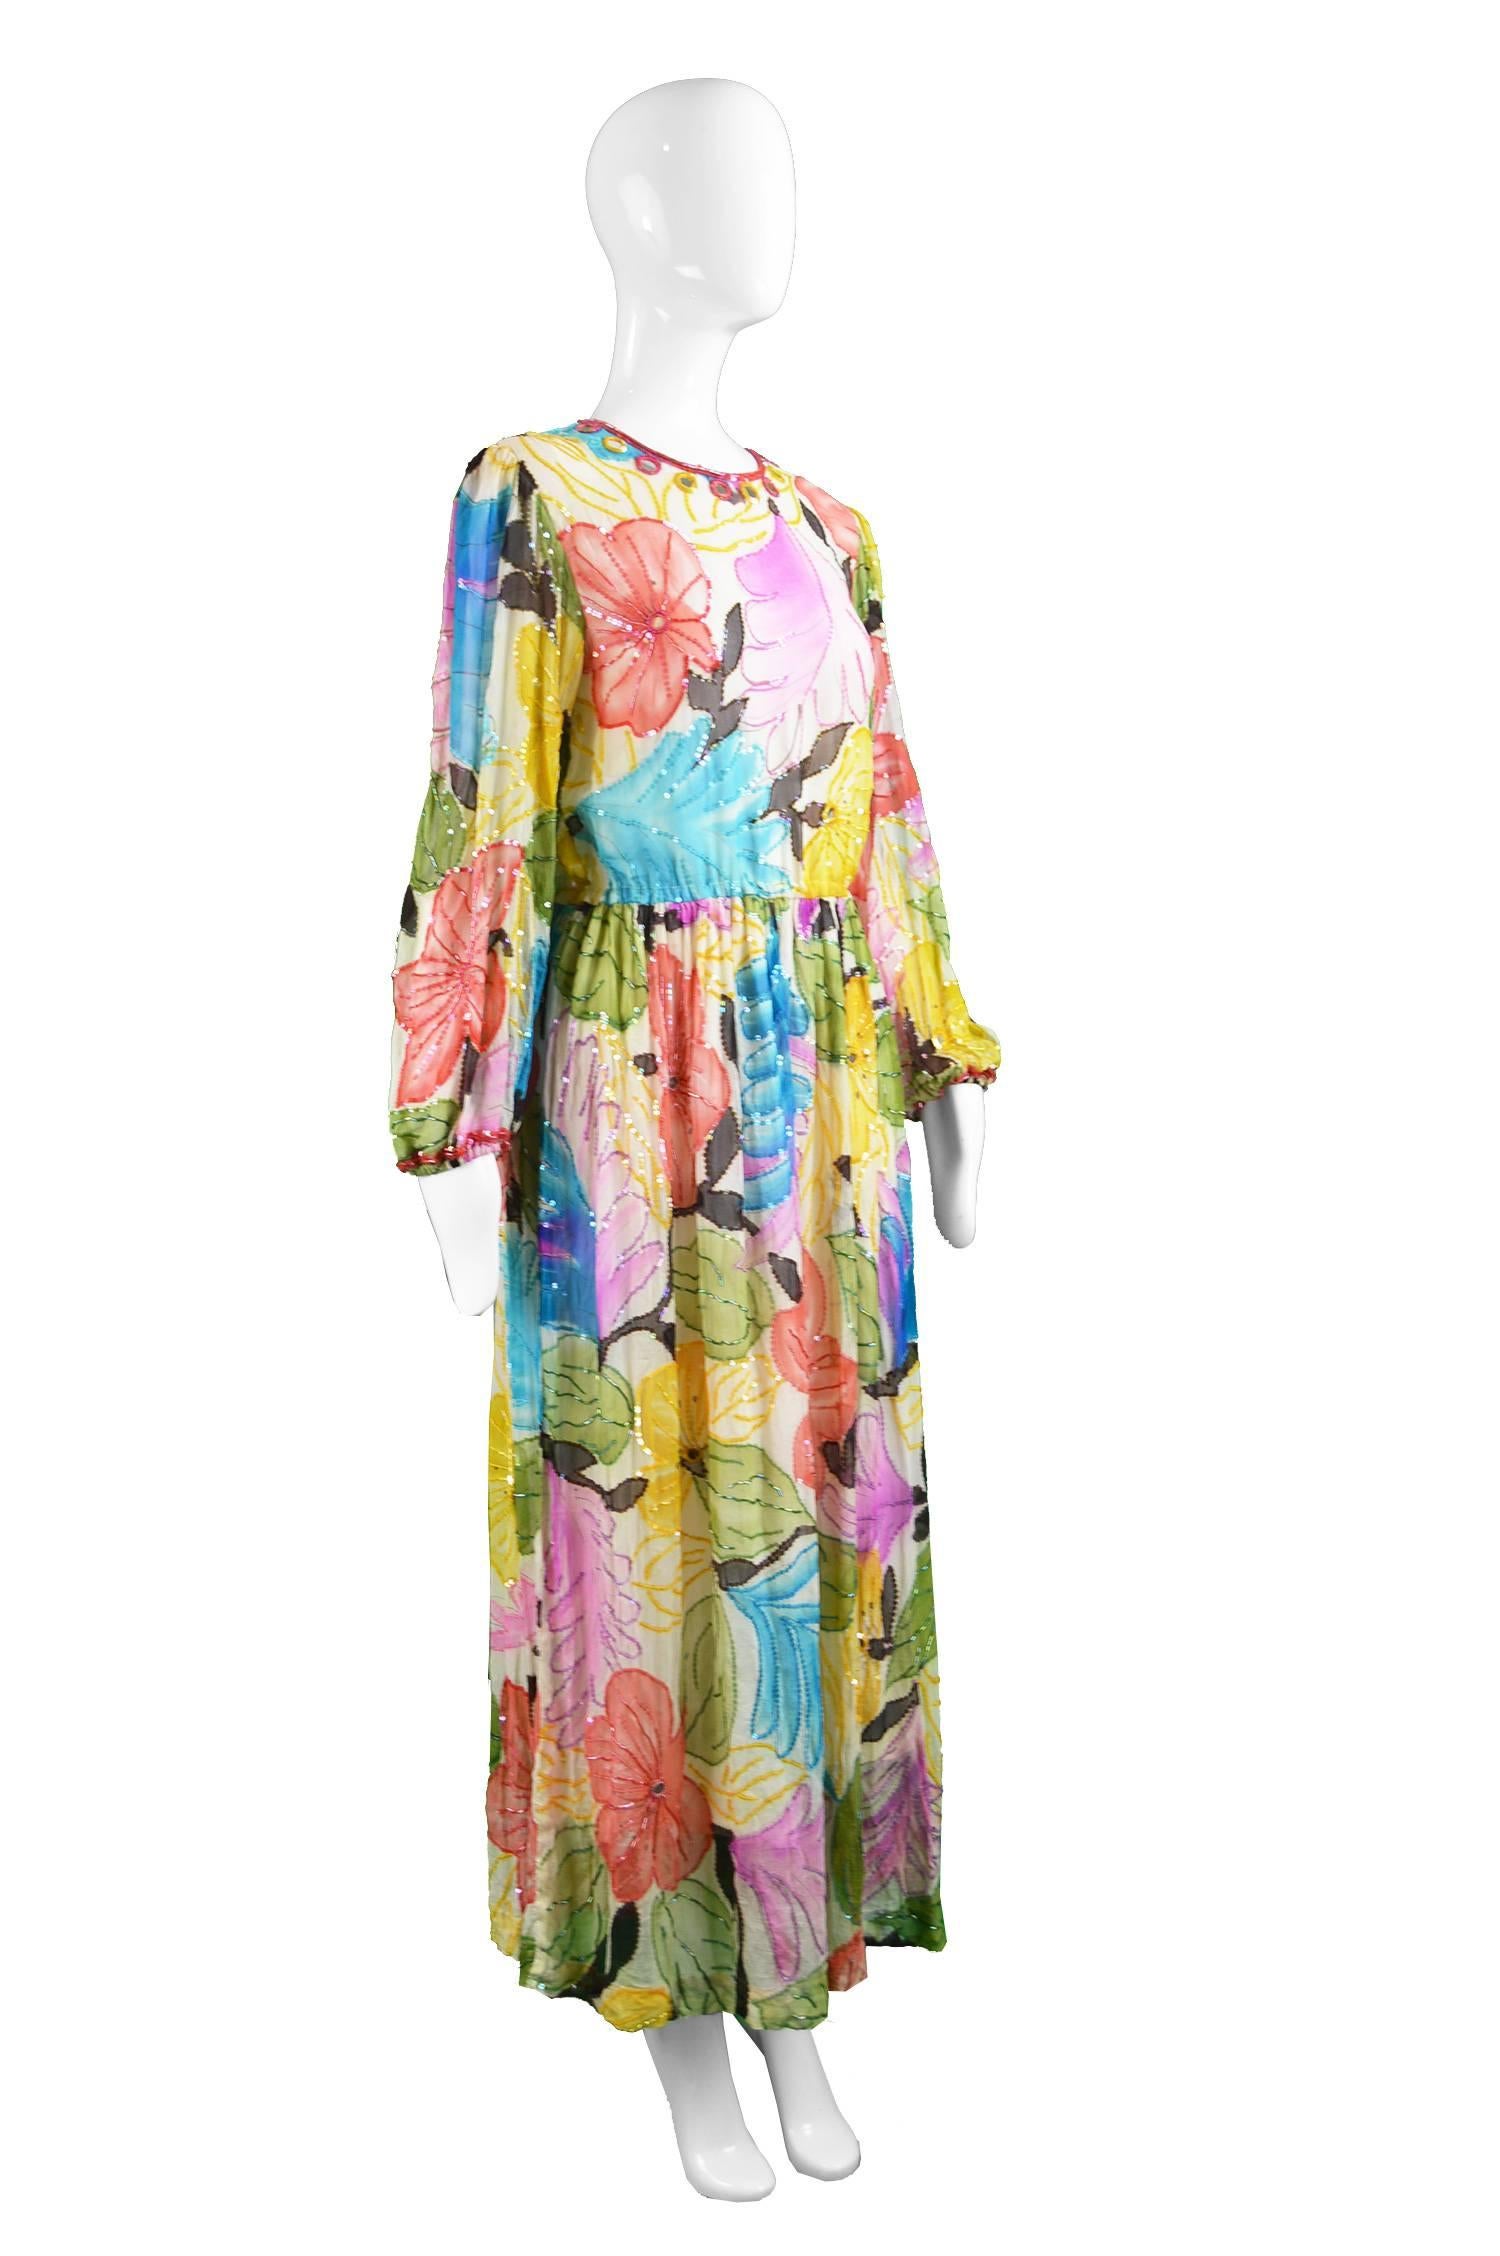 A breathtaking vintage evening dress from the 70s by New York couturier and luxury designer, Swee Lo, known for her beaded silk gowns. This stunning example has a bohemian watercolour style print with mirrorwork at the top and glass beading adding a